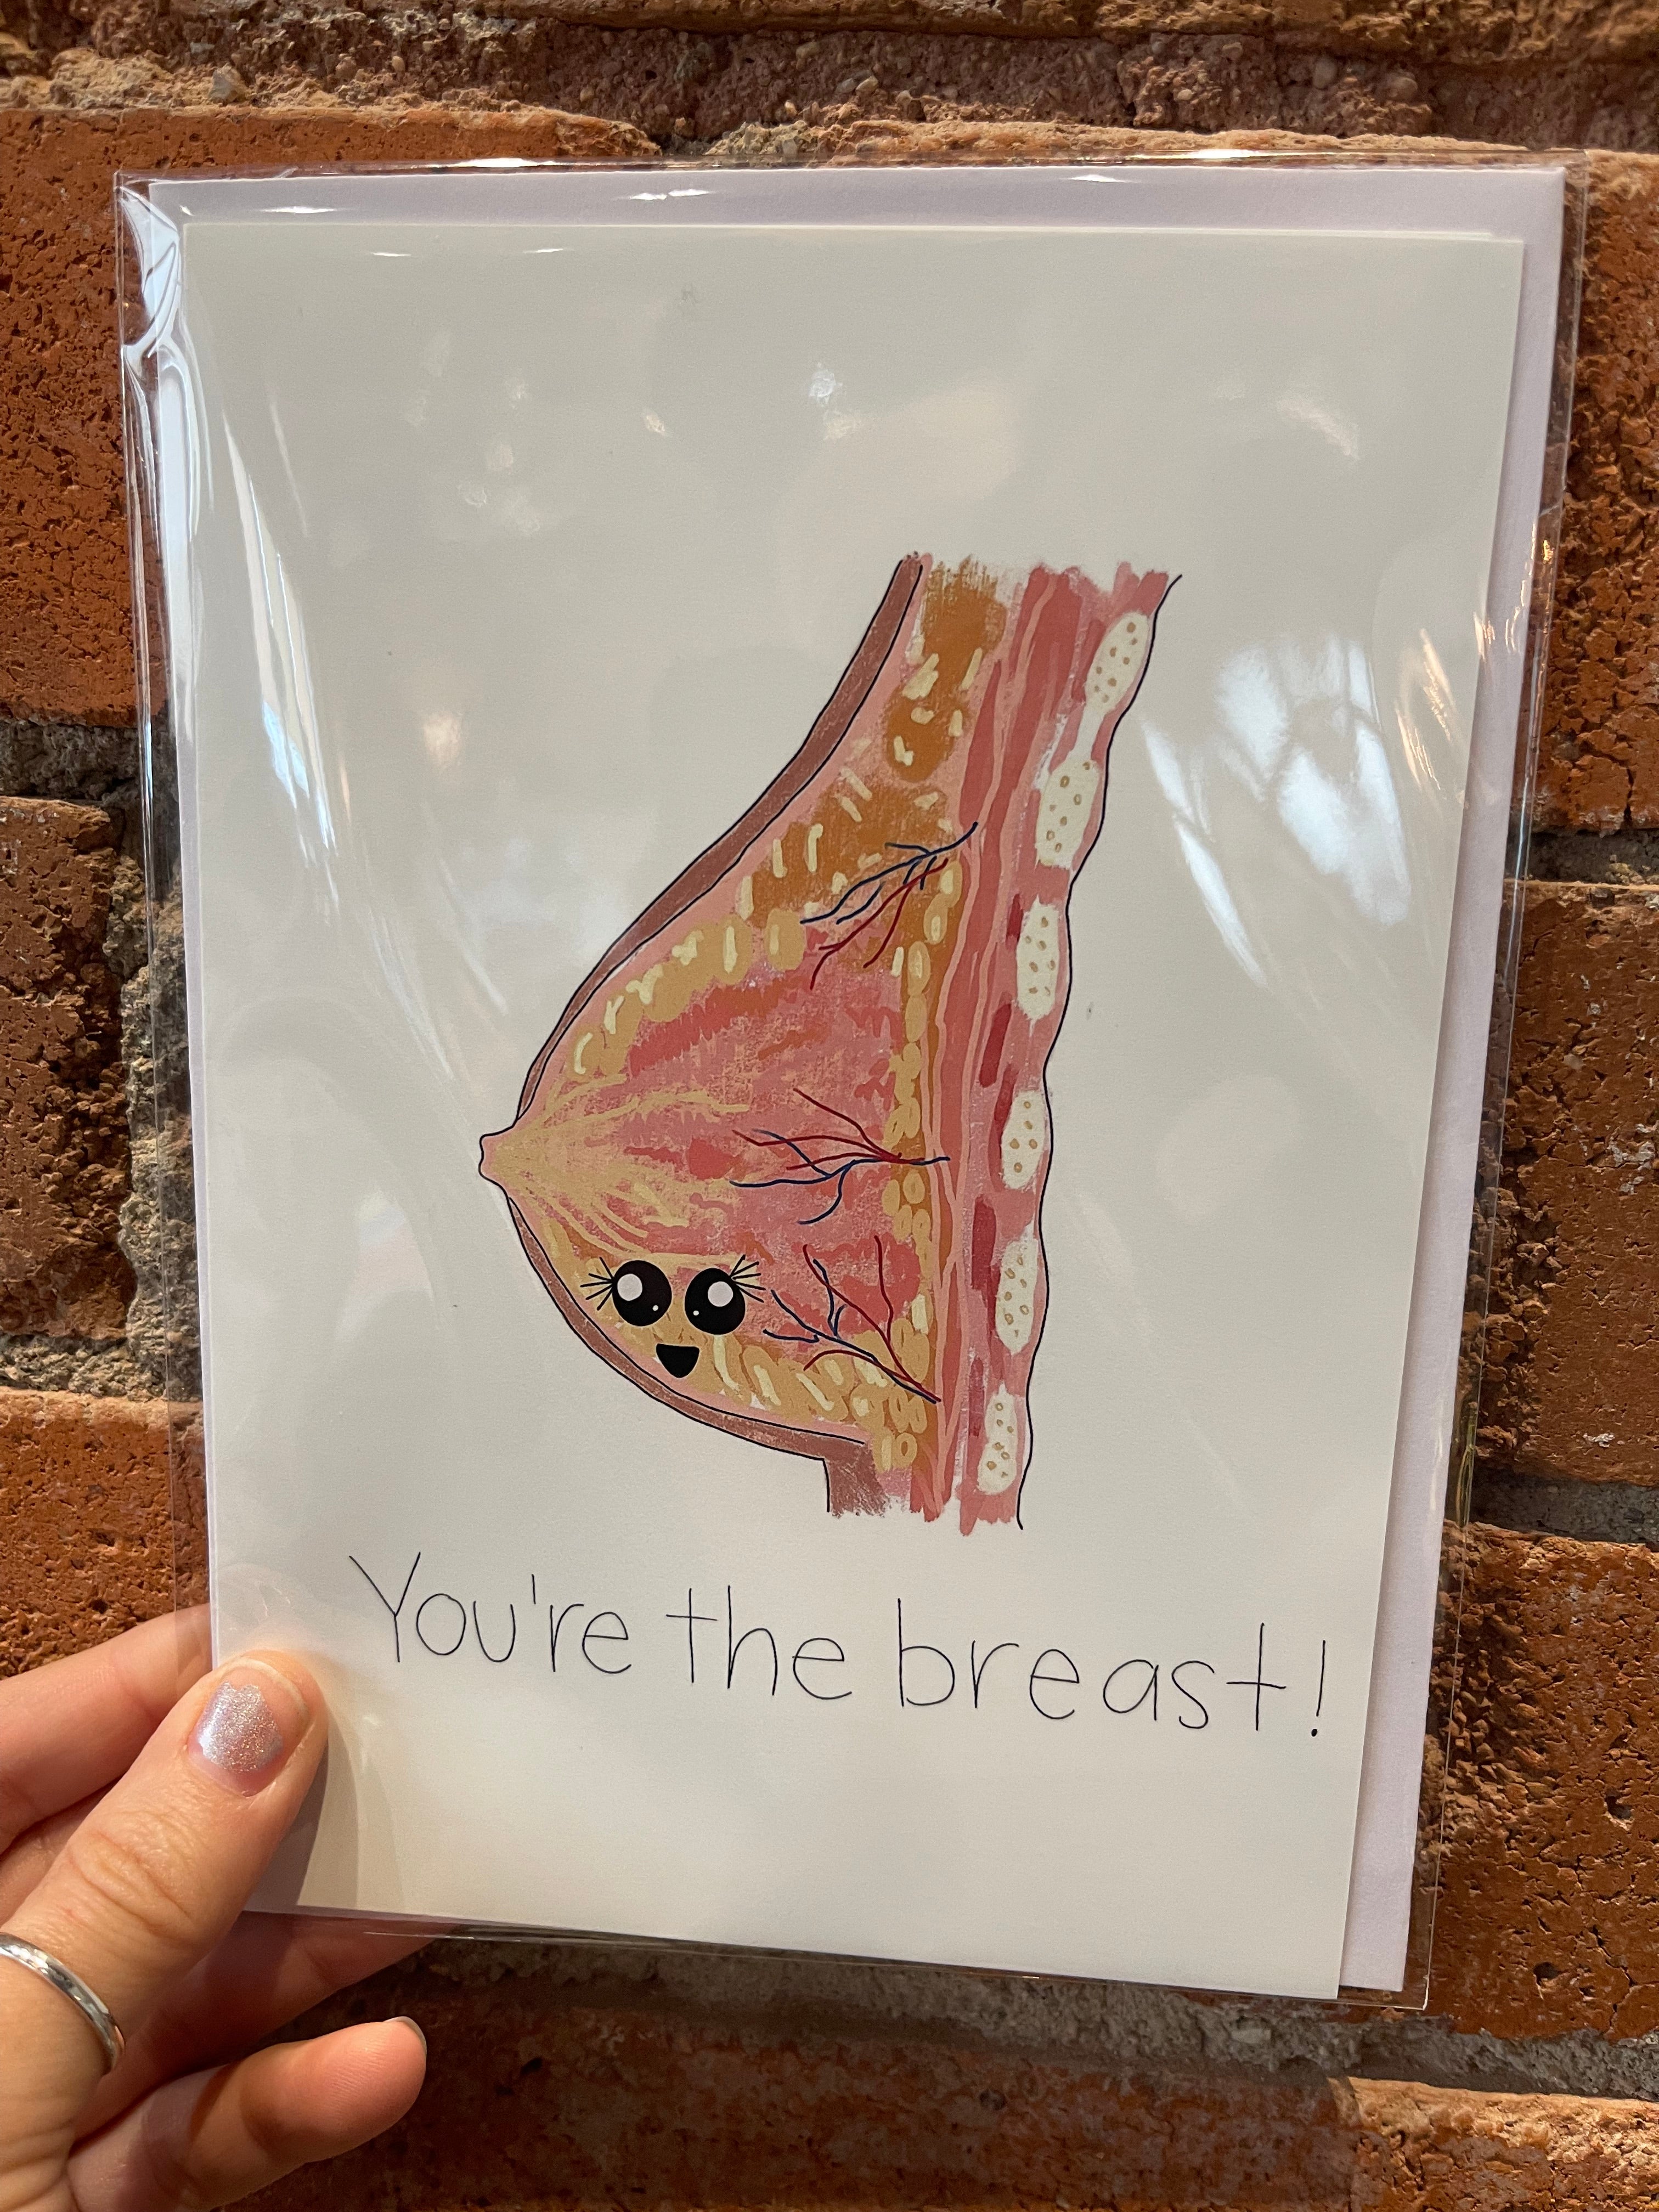 You're The Breast Card